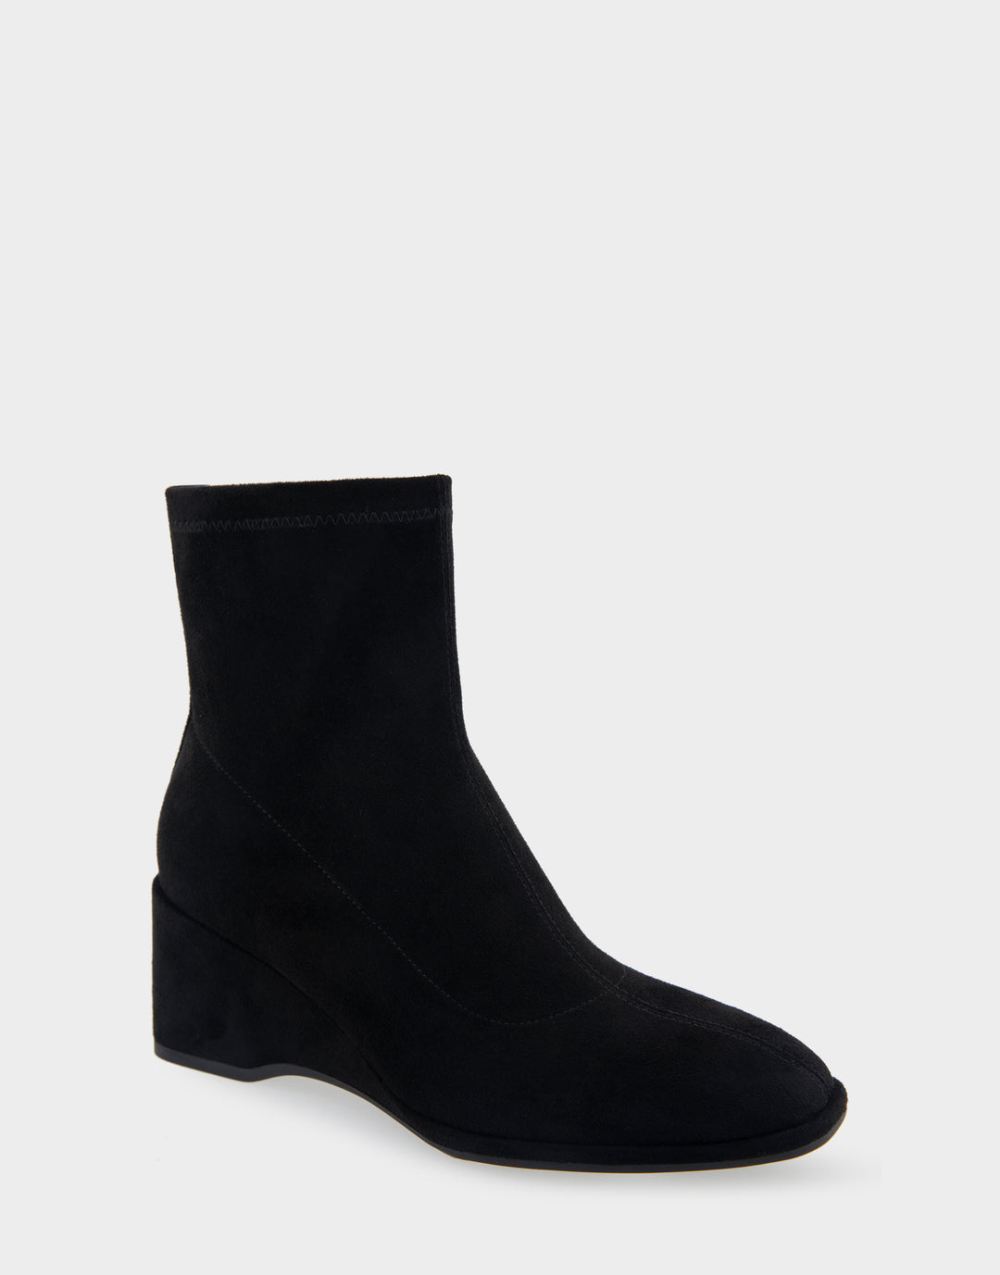 Women's | Anouk Black Faux Suede Wedge Heel Ankle Boot